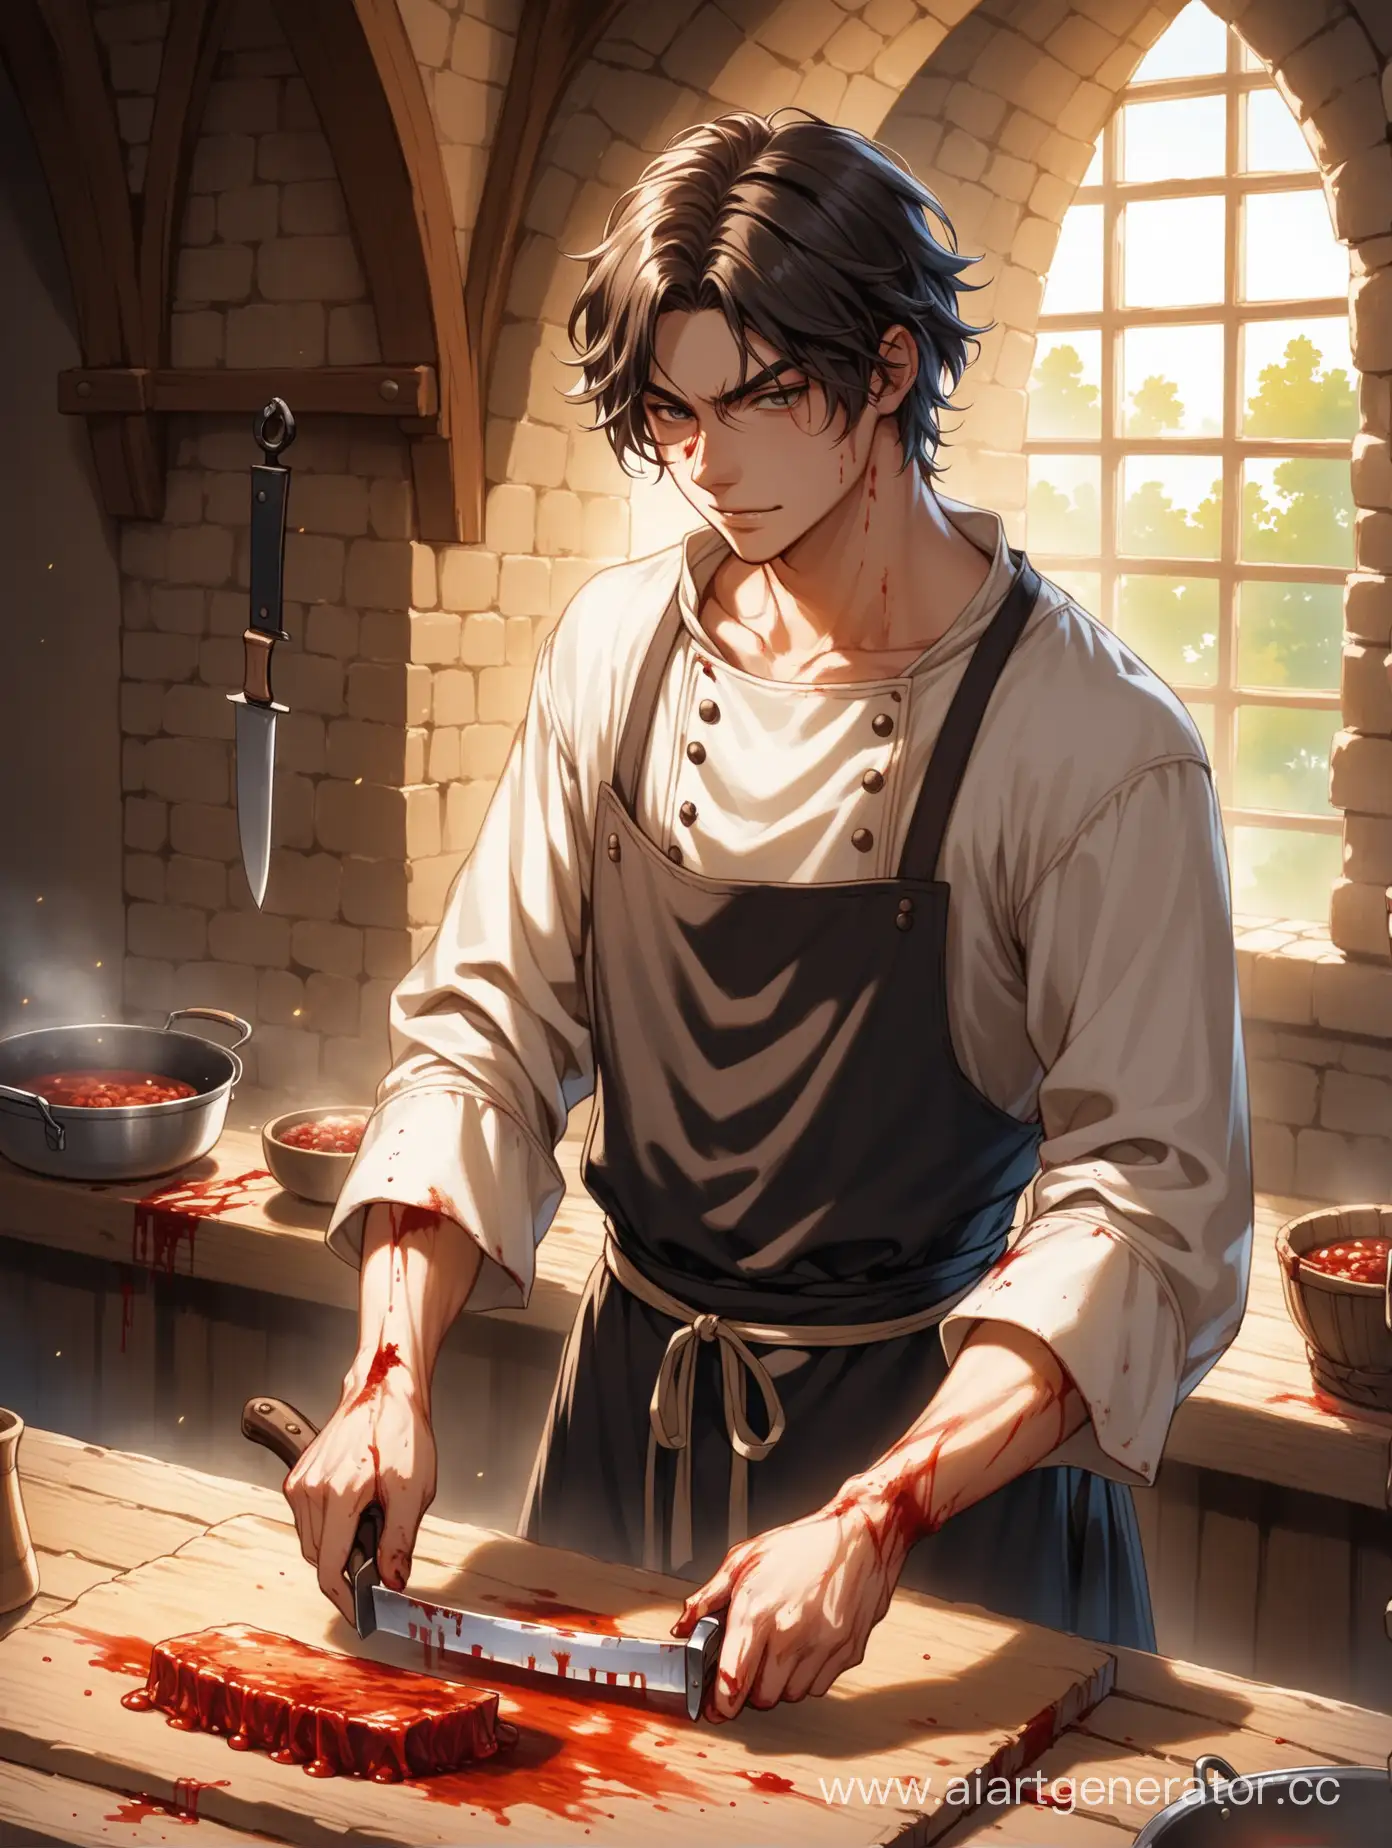 A young man, a medieval cook with a bloody knife